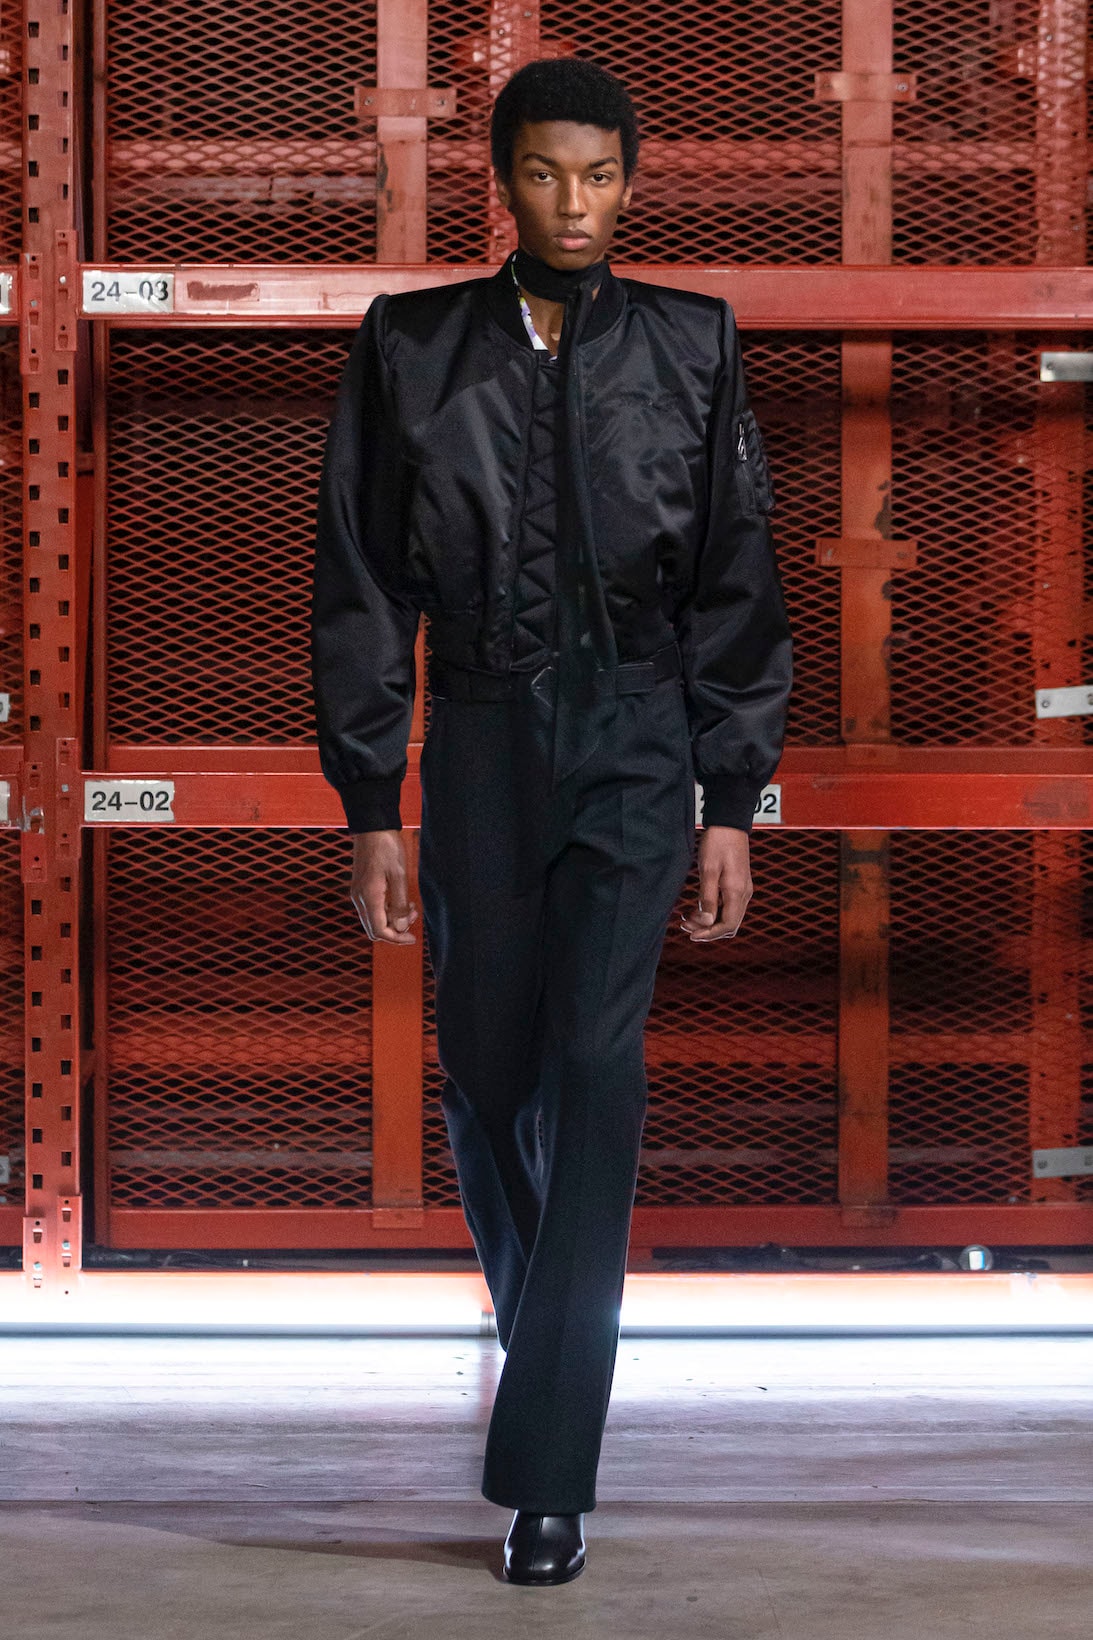 off white virgil abloh spring summer adam is eve collection imaginary tv digital runway show jacket outerwear pants shoes